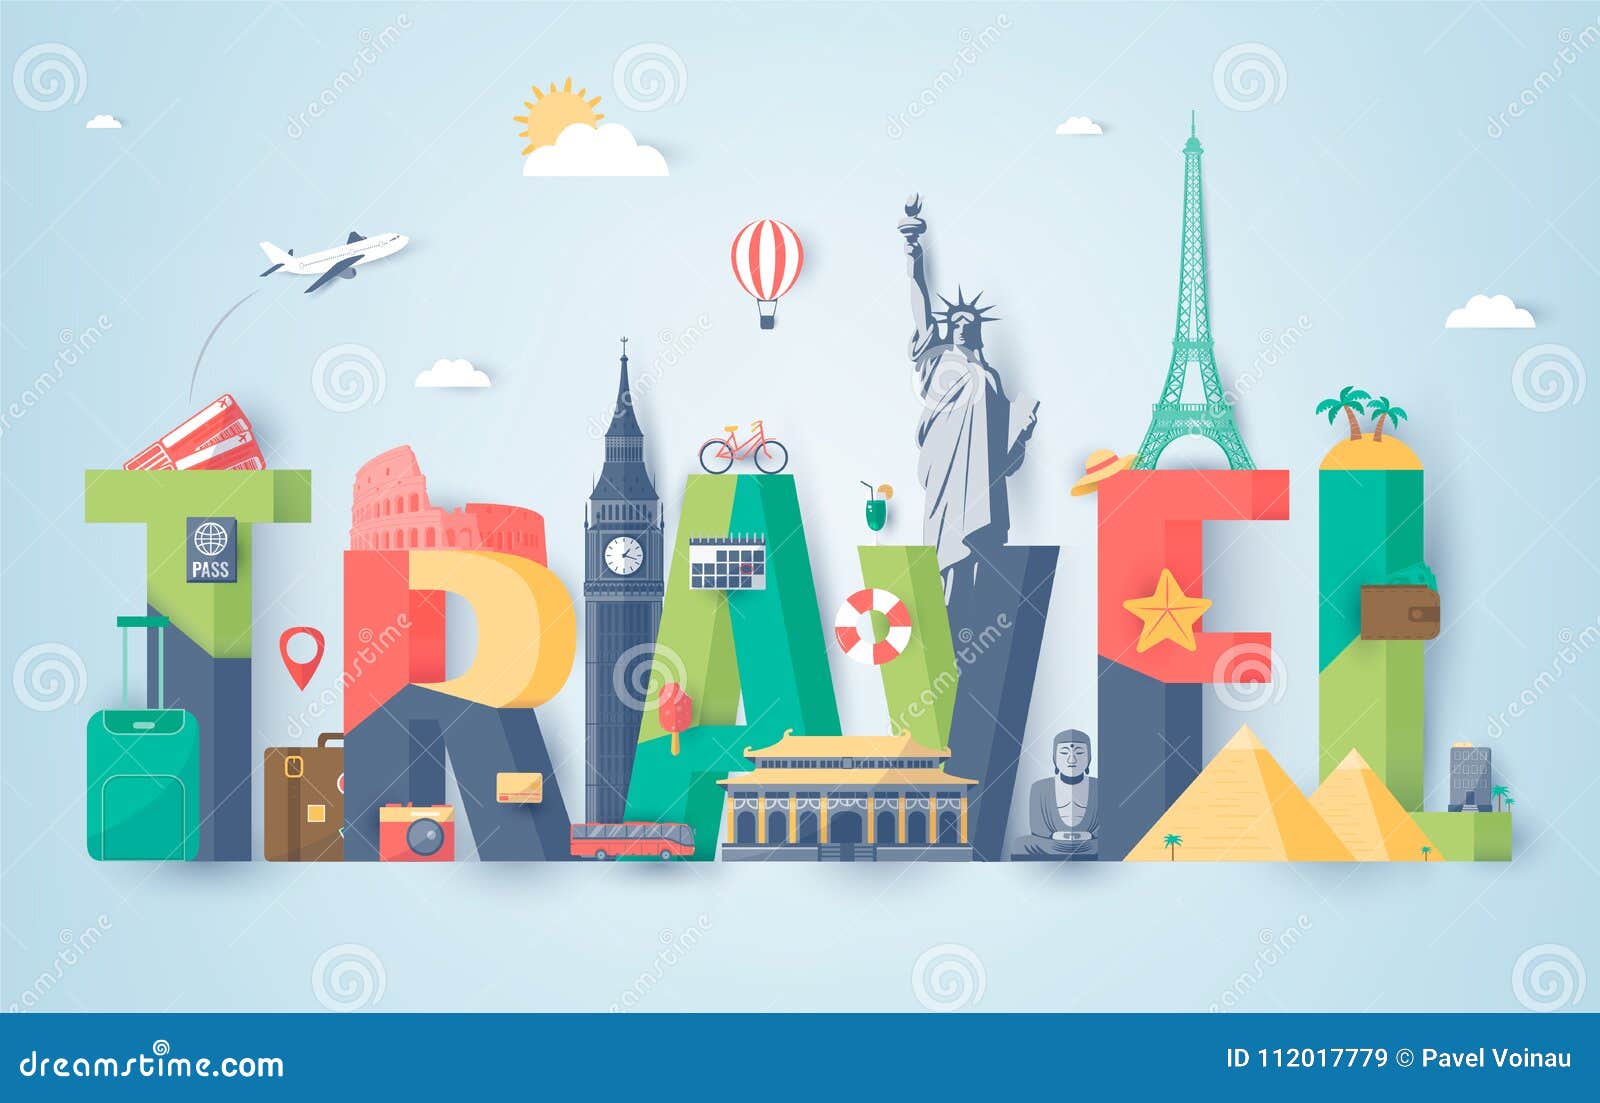 Travel Composition with Famous World Landmarks. Travel and Tourism ...